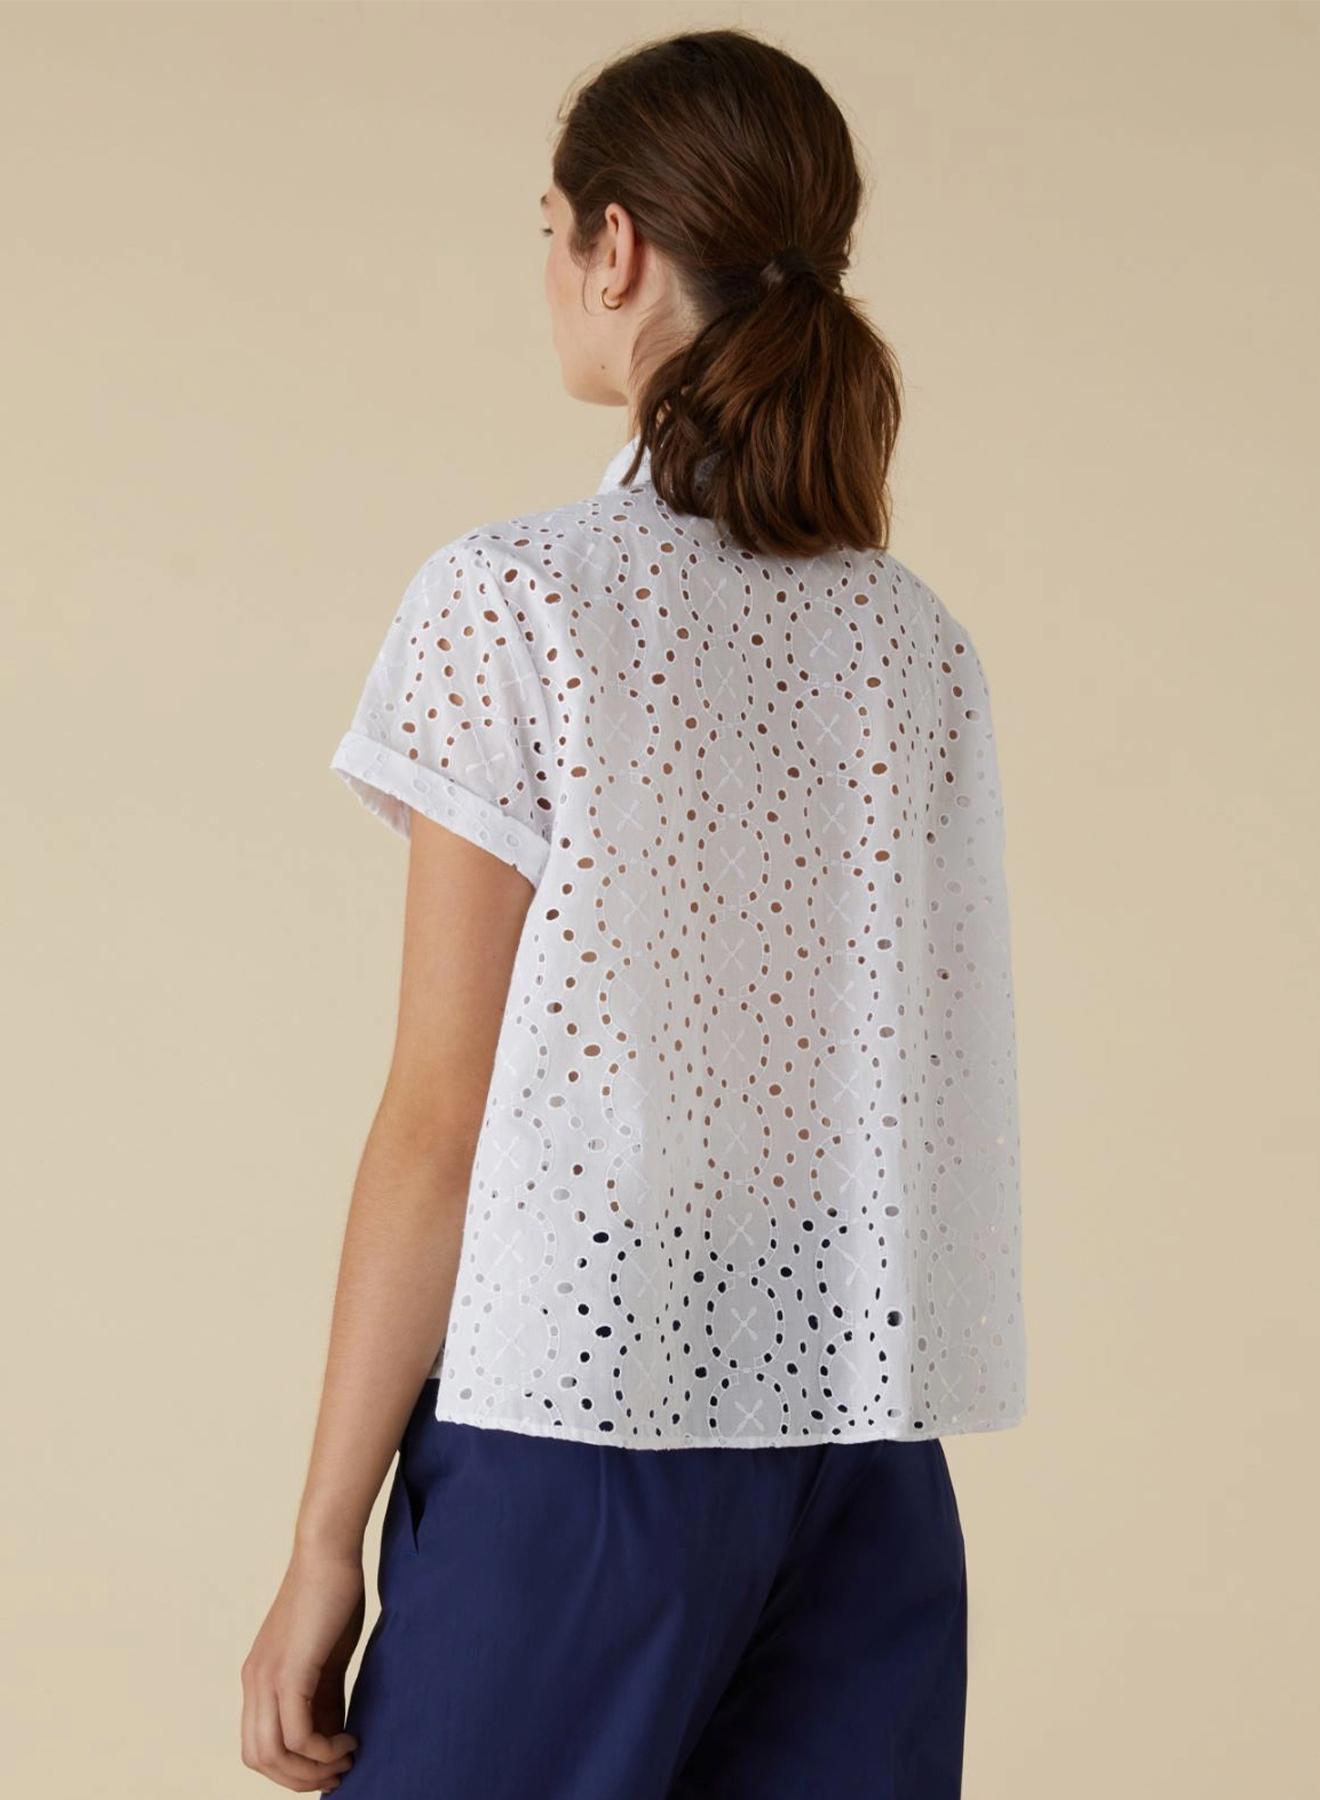 White cotton Shirt Broderie anglaise Emme Marella - 2